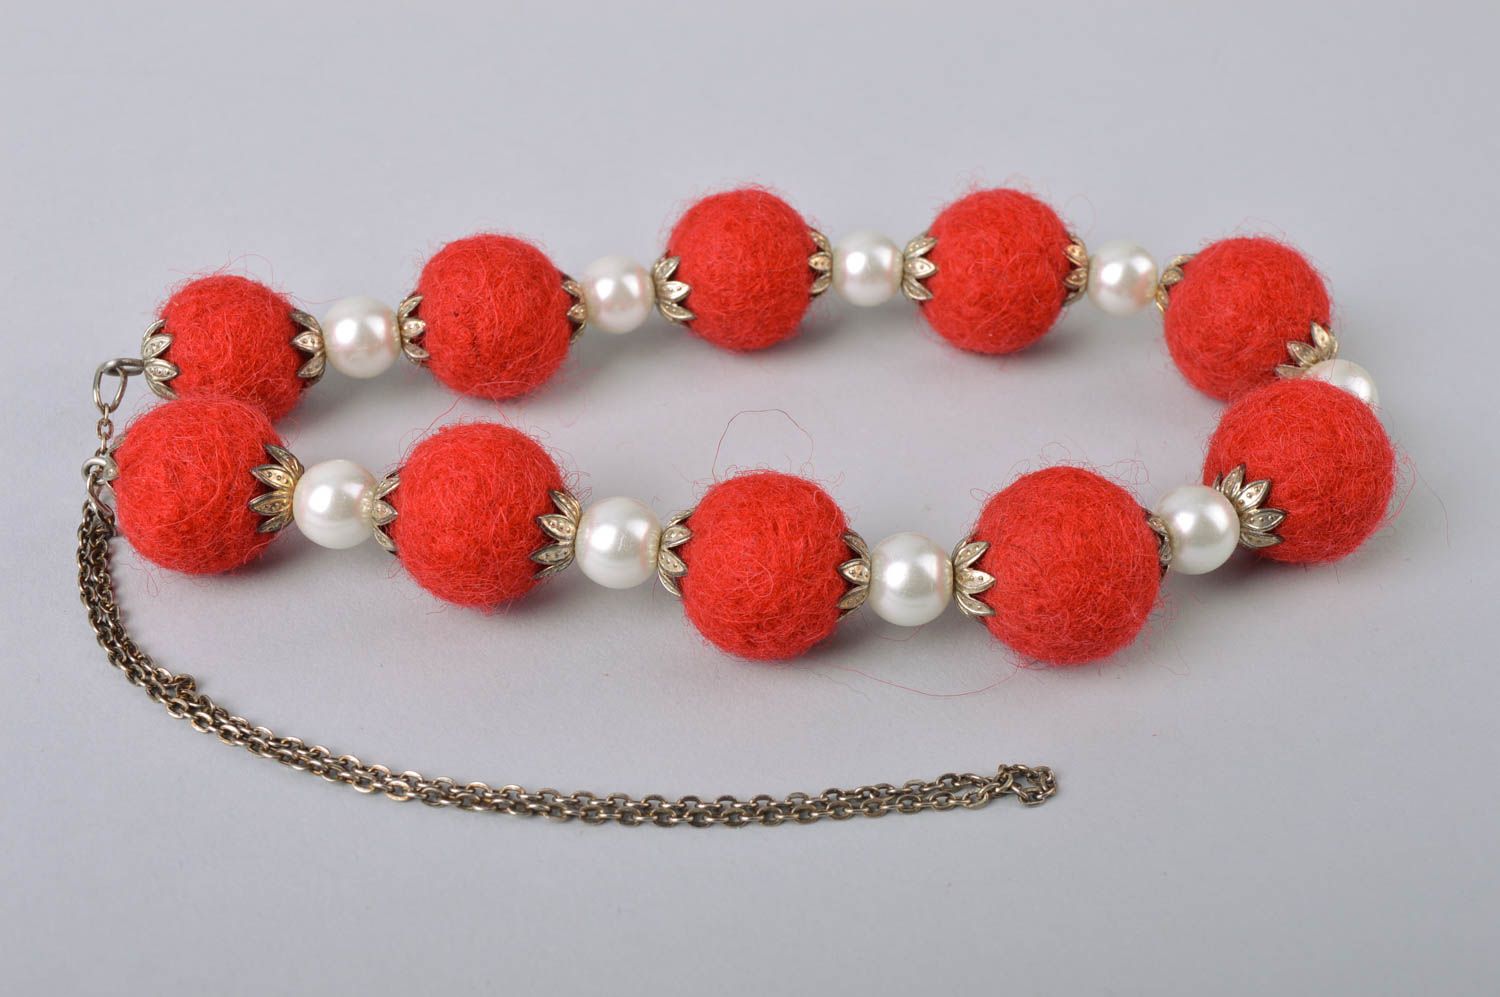 Wool felting beaded necklace with artificial pearls stylish handmade accessory photo 5